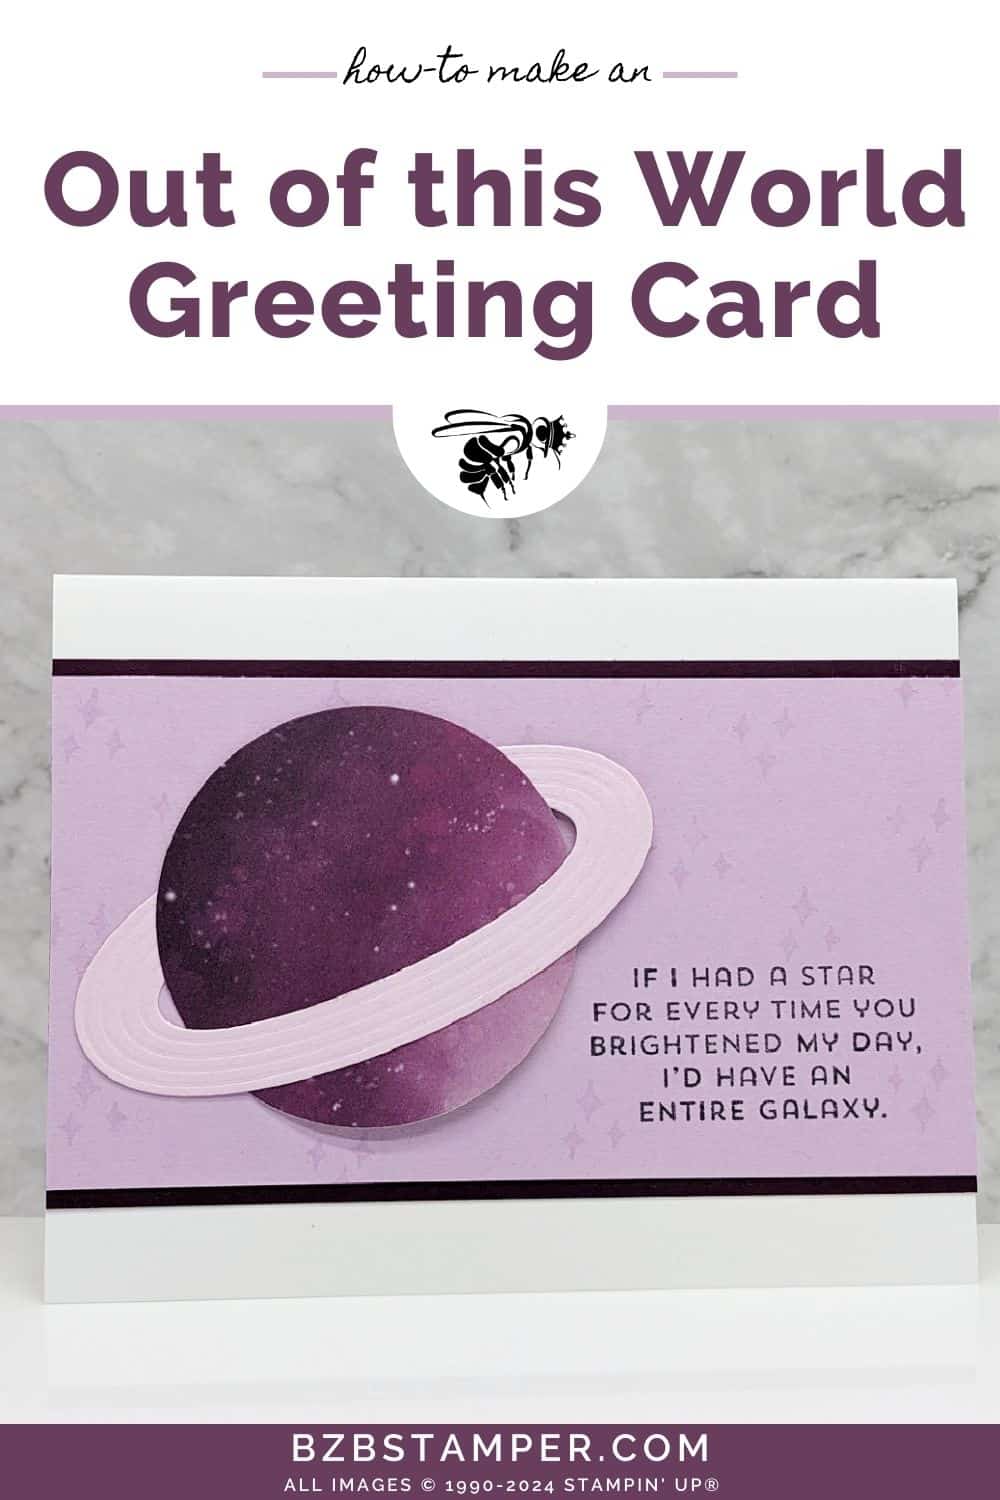 Cosmic Card Using The Reach for the Stars Bundle in purples.  Features a planet with the sentiment "If I had a star for every time your brightened my day..."